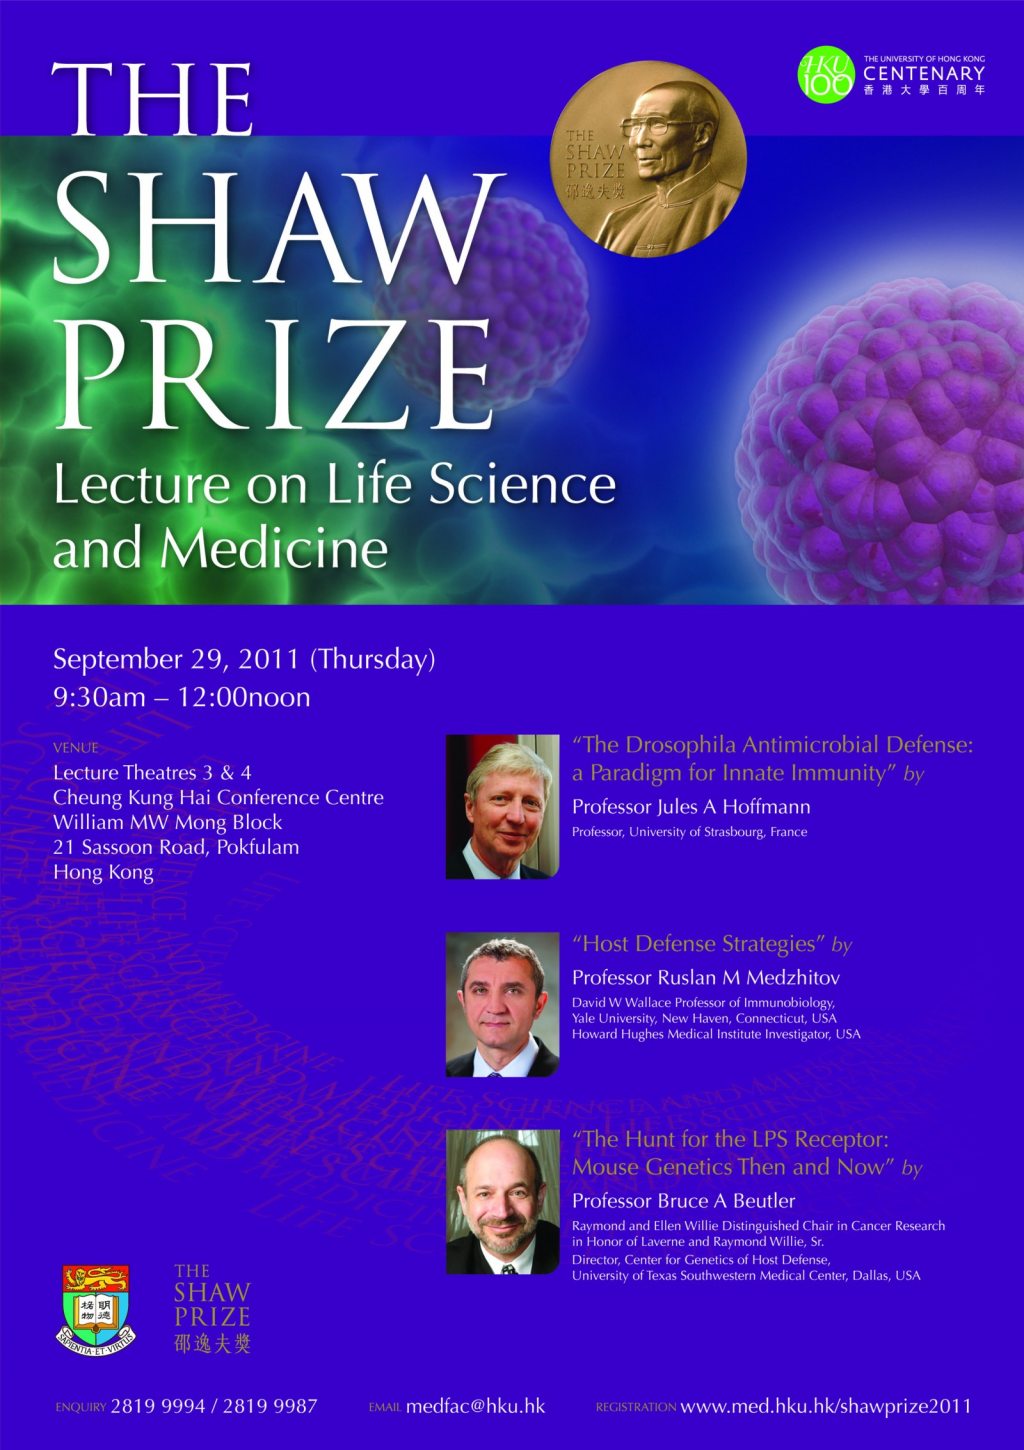 The Shaw Prize 2011 - Lecture on Life Science and Medicine